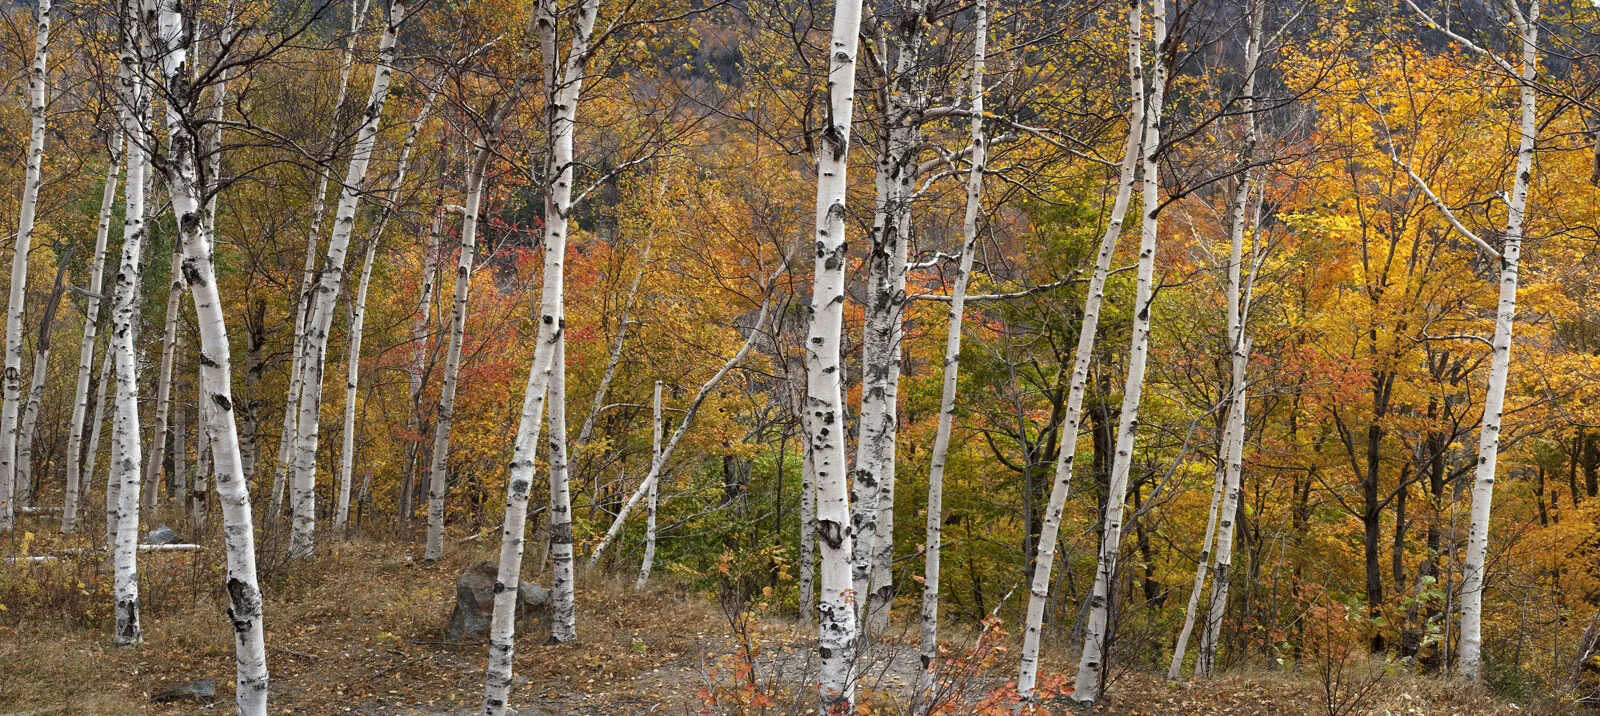 10-facts-about-birch-trees